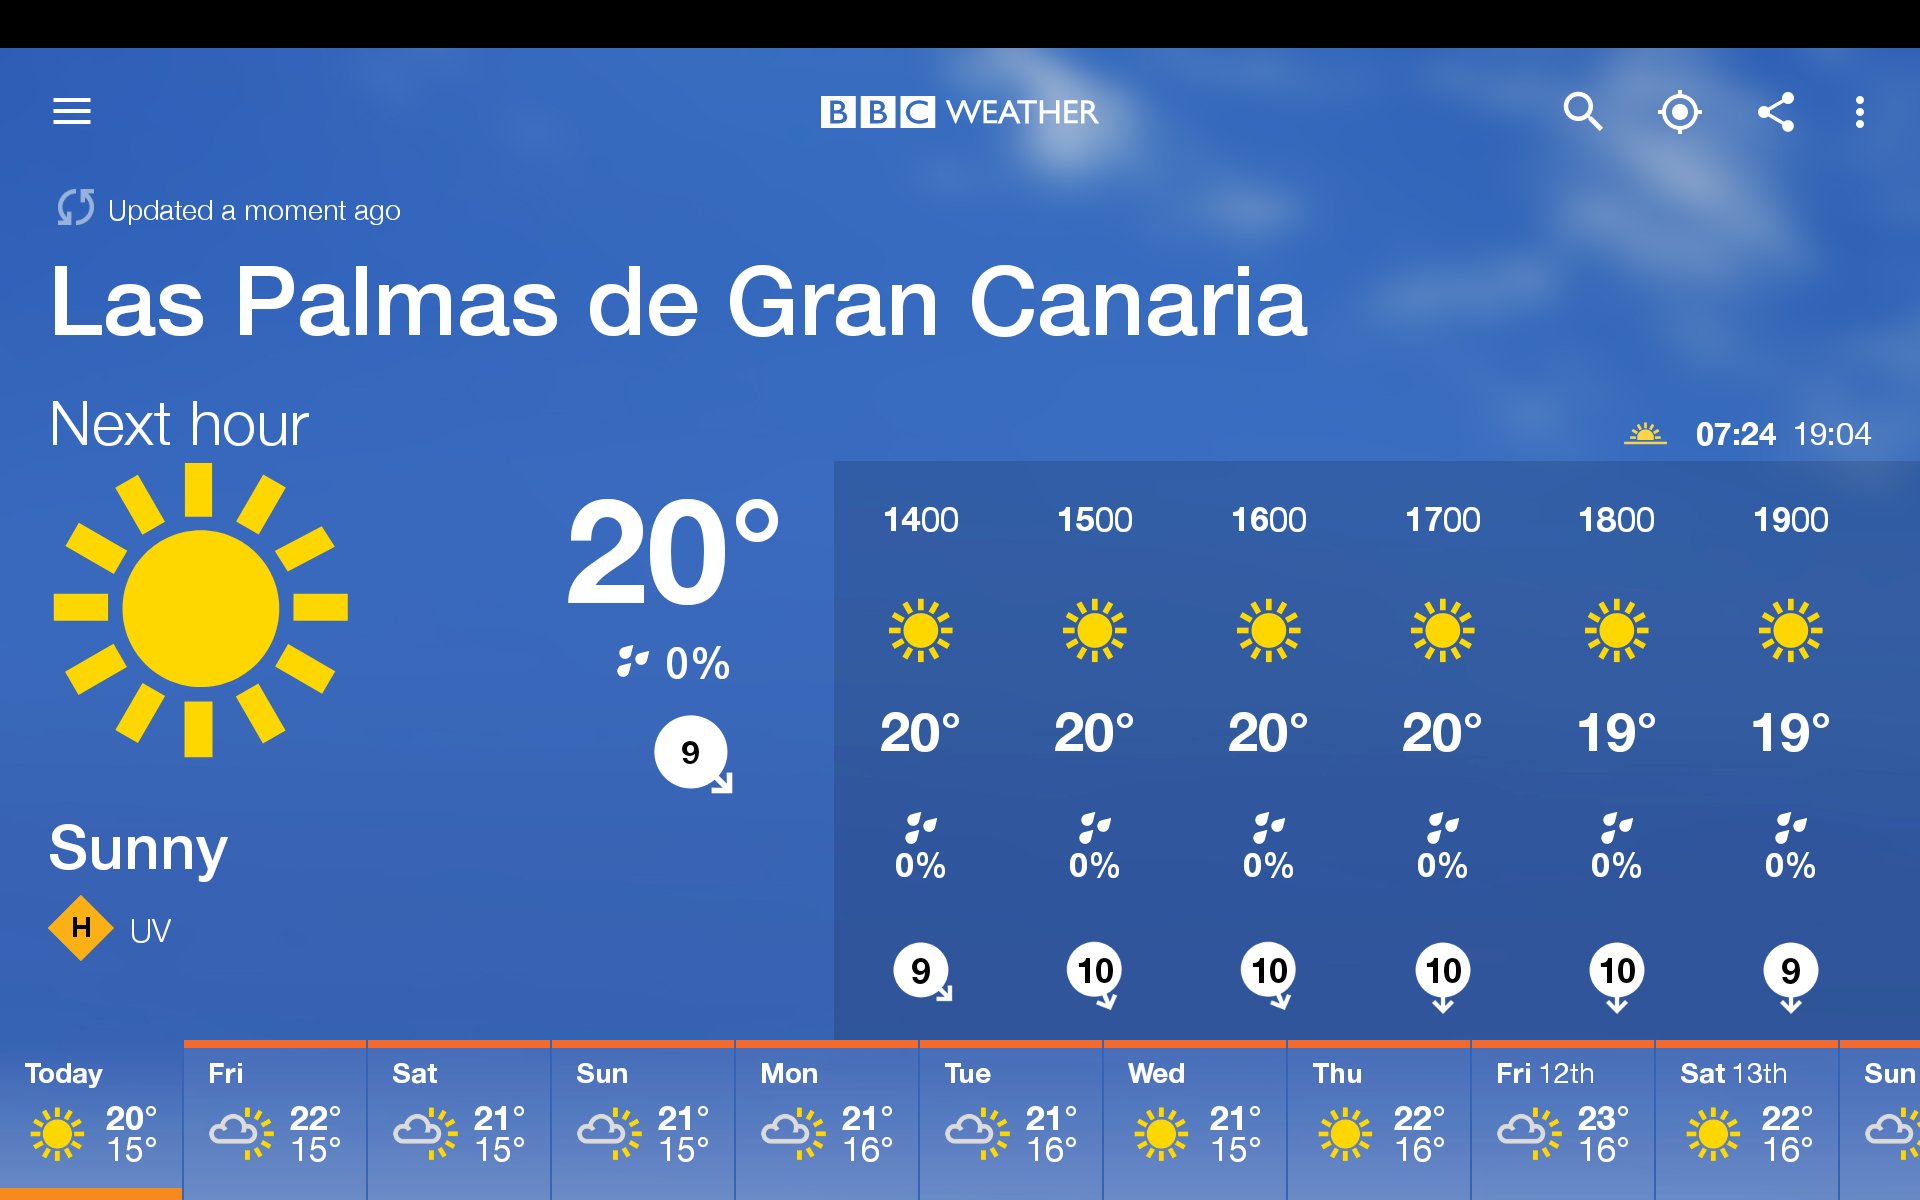 pulloxhillpostbox on X: "Today's BBC Weather forecast for Las Palmas de Gran Canaria: Sunny. Max 20°Celsius, 15°Celsius. https://t.co/ukhVsJIV1h https://t.co/fvY60qVras" / X